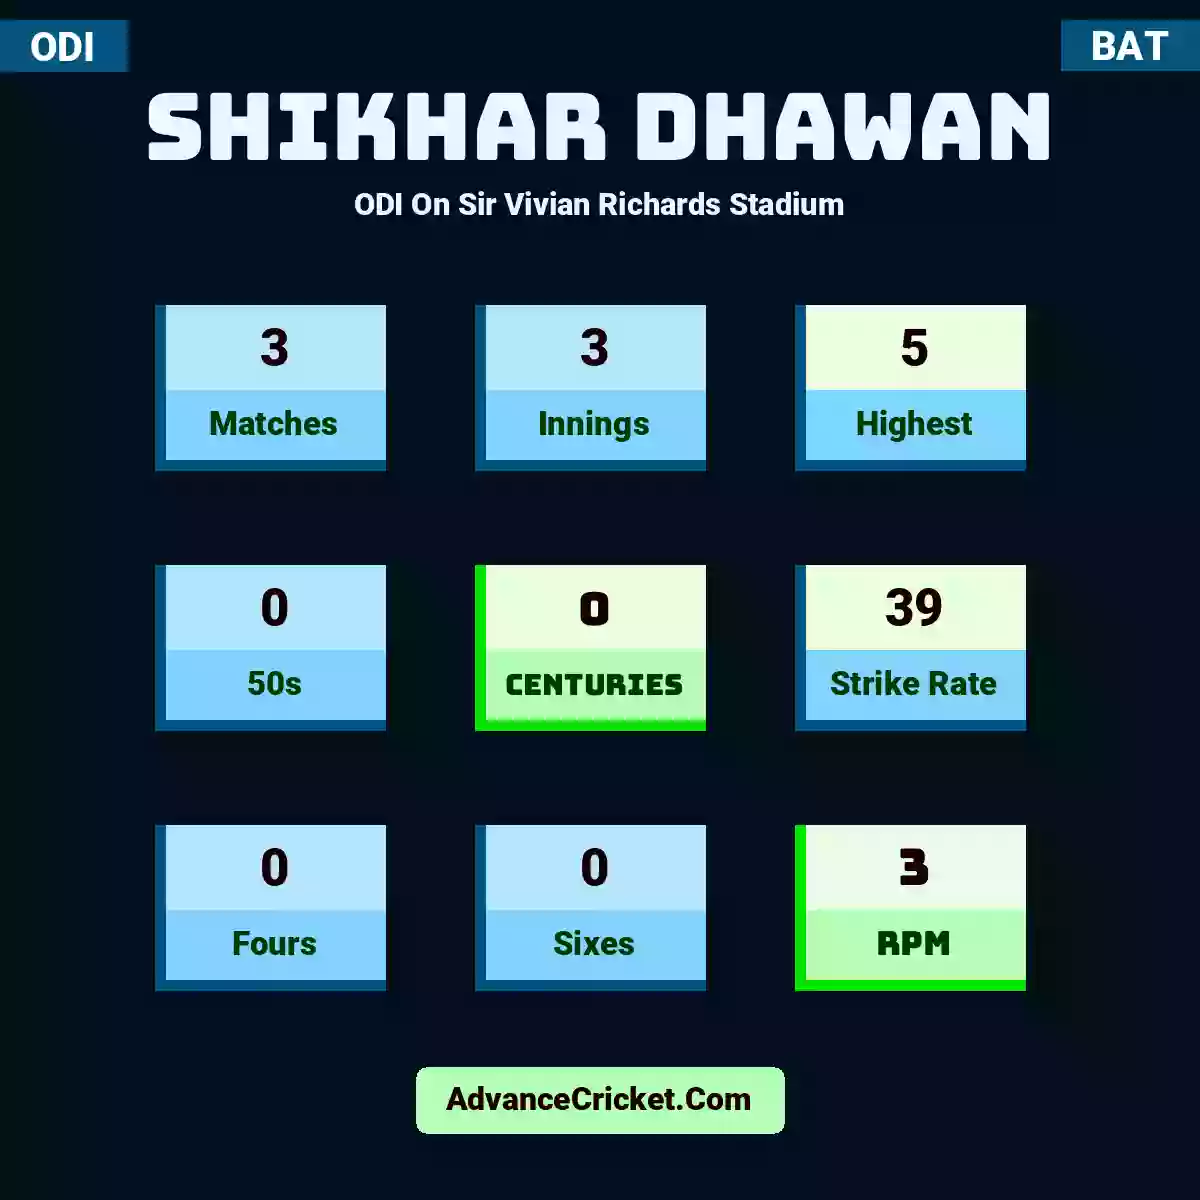 Shikhar Dhawan ODI  On Sir Vivian Richards Stadium, Shikhar Dhawan played 3 matches, scored 5 runs as highest, 0 half-centuries, and 0 centuries, with a strike rate of 39. S.Dhawan hit 0 fours and 0 sixes, with an RPM of 3.